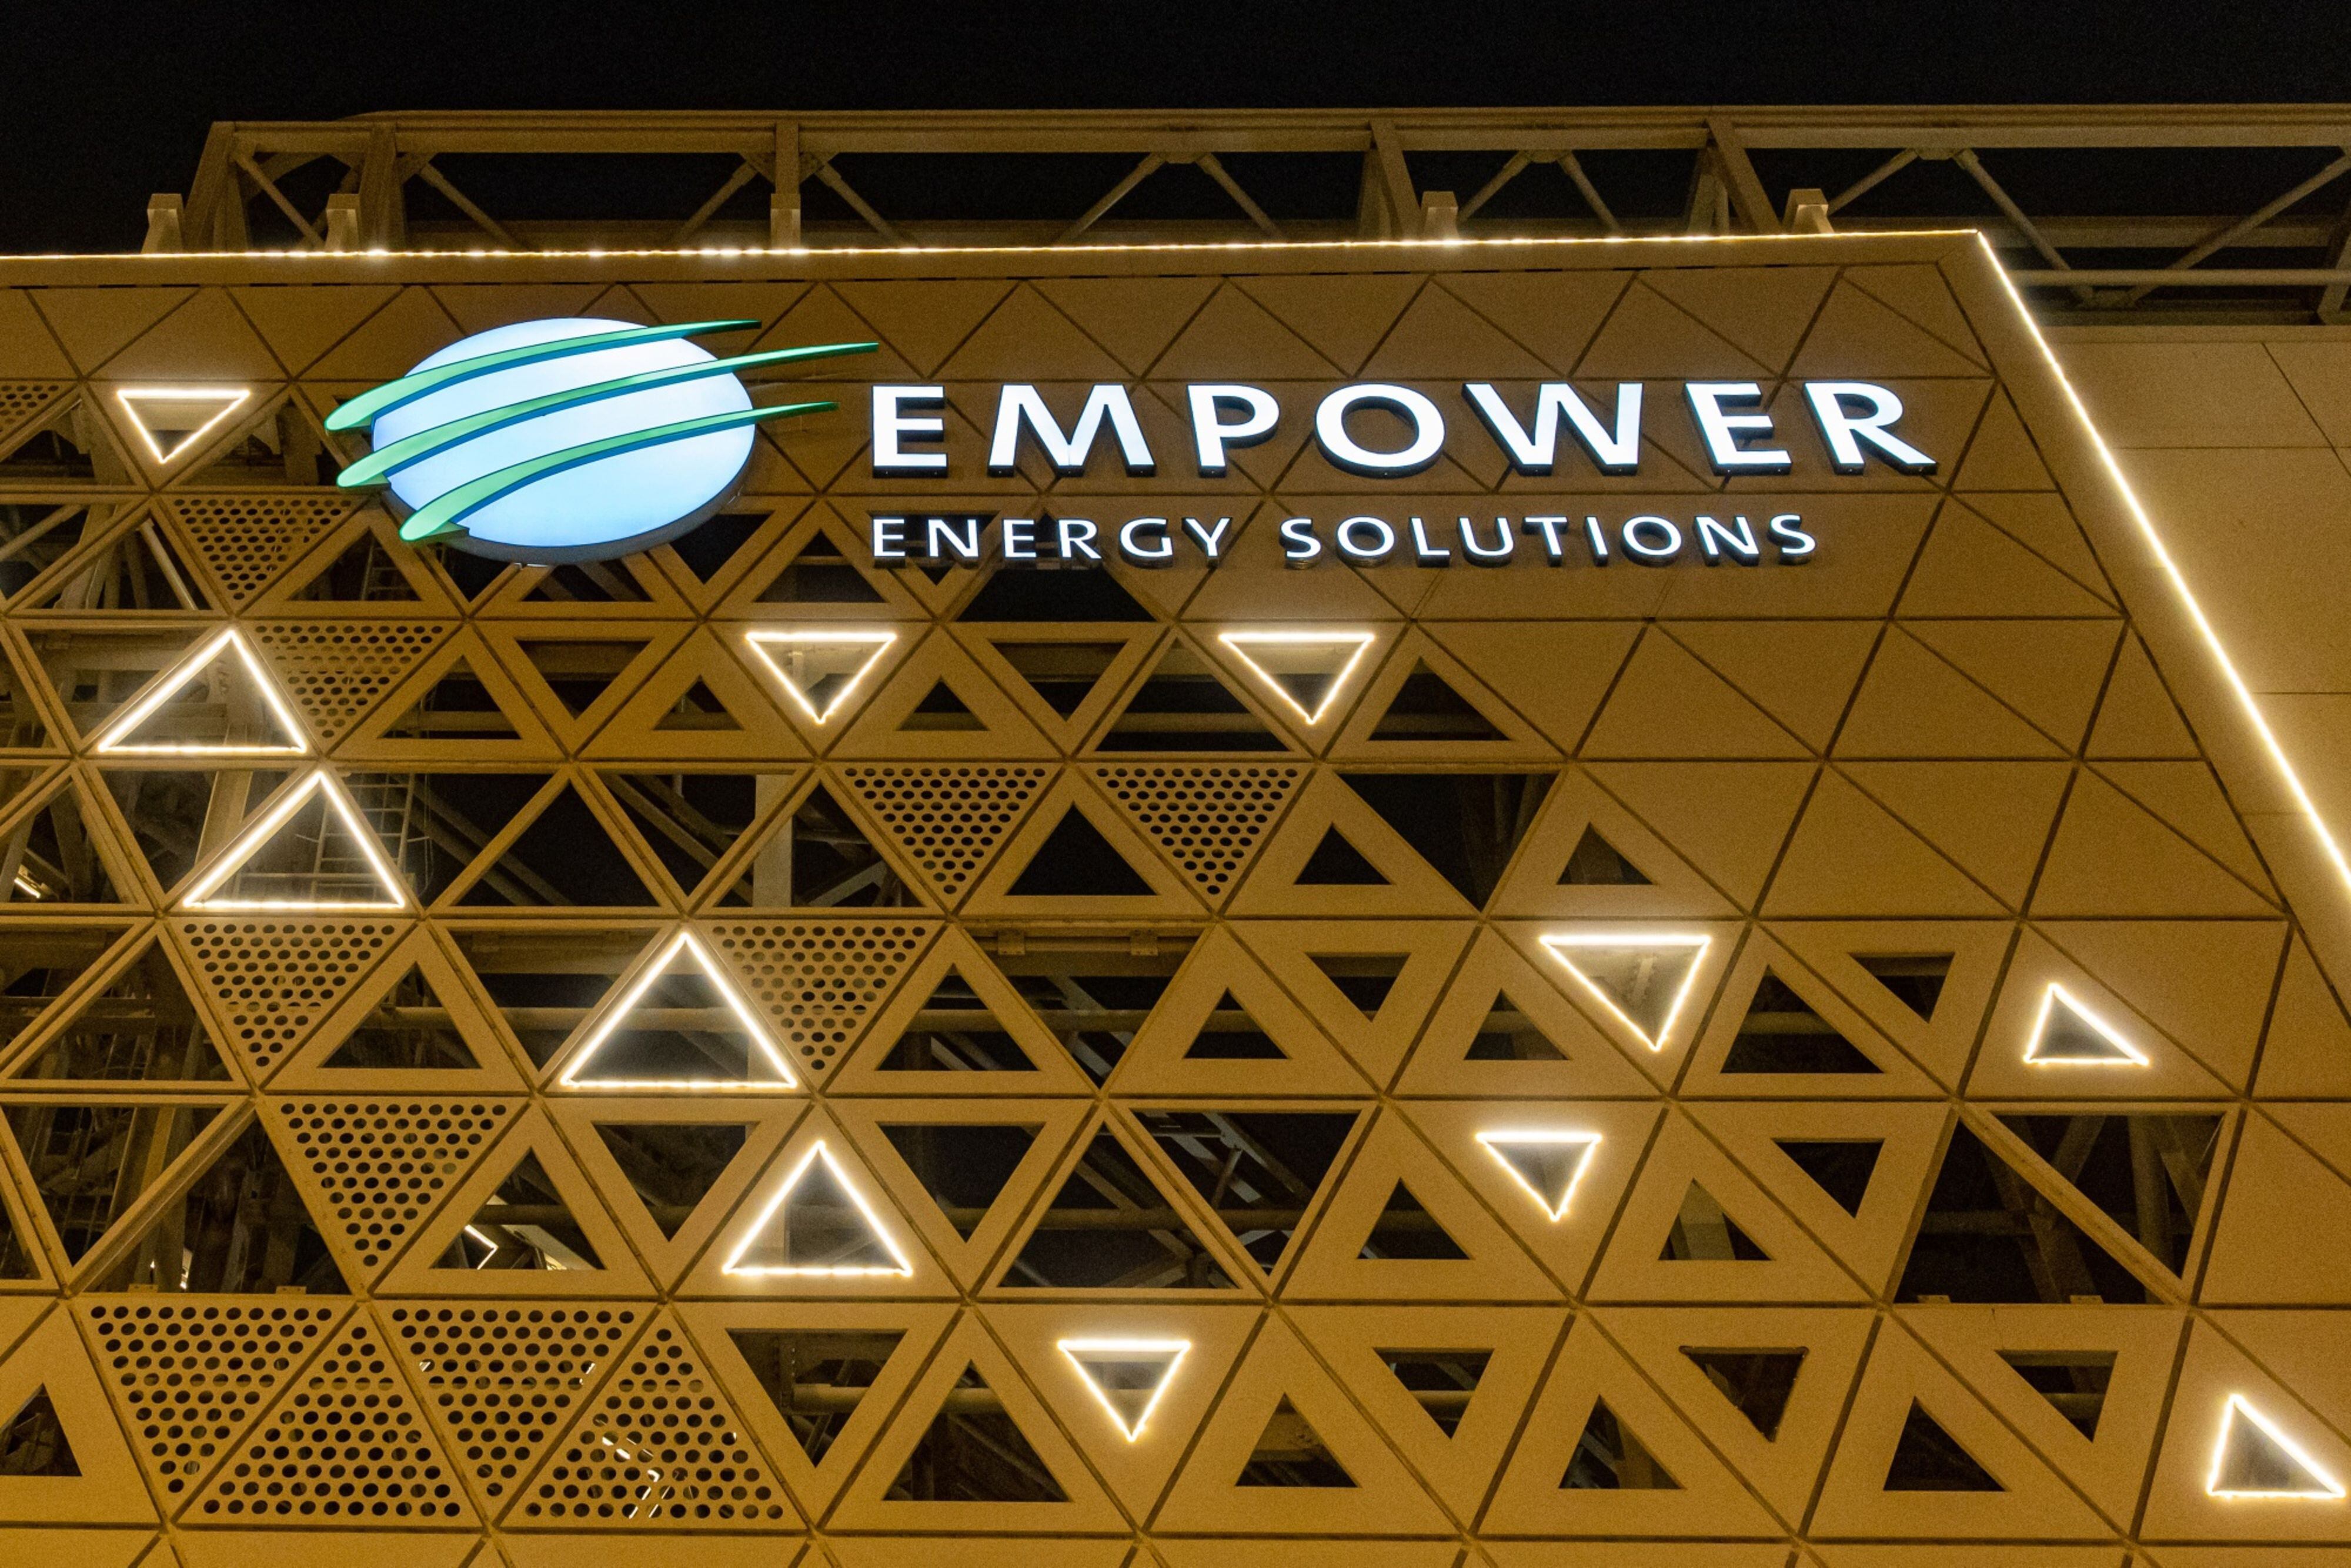 Why Empower? - Empower Energy Solutions